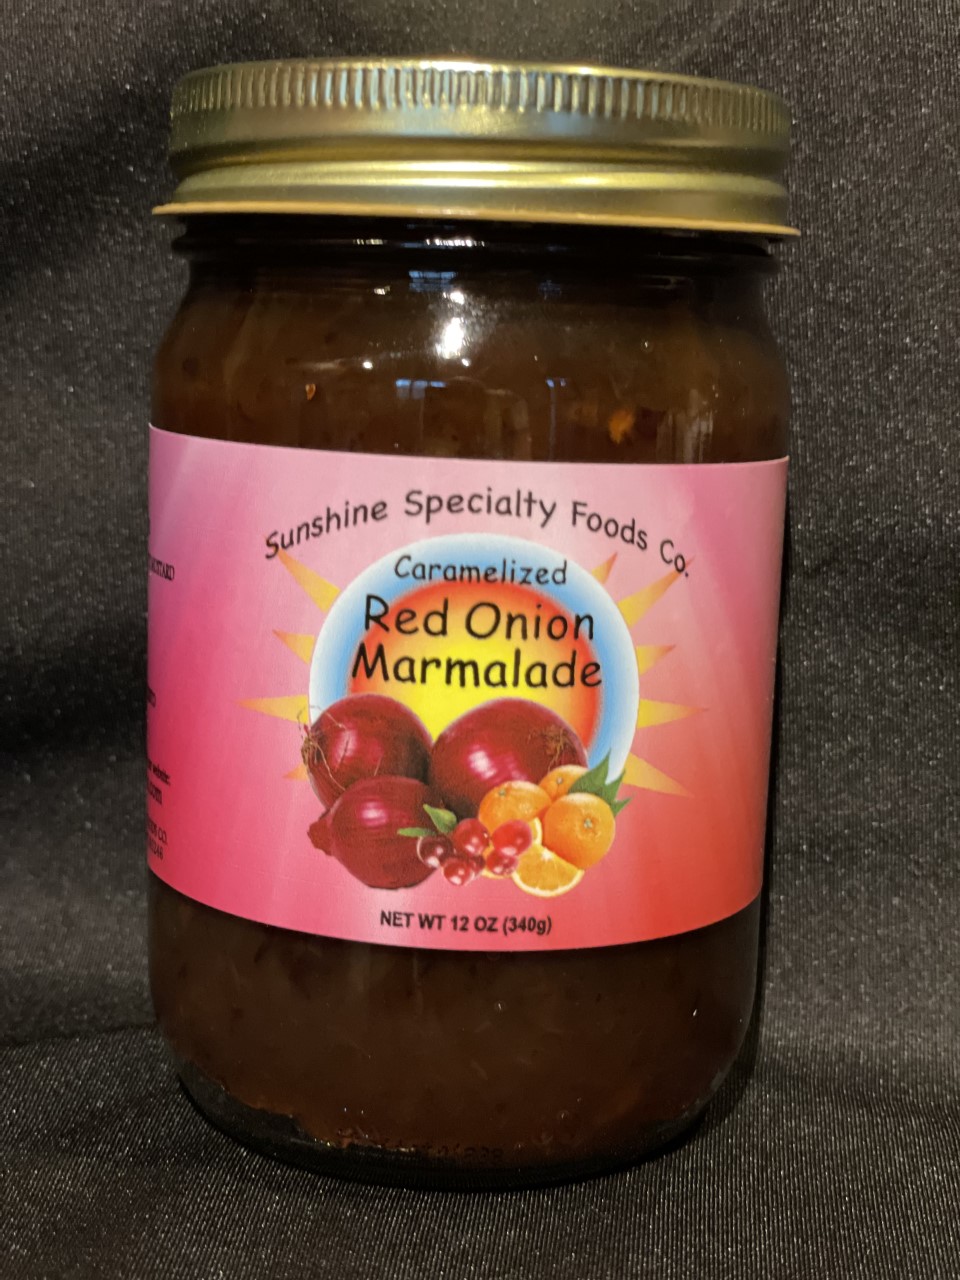 Caramelized Red Onion Marmalade